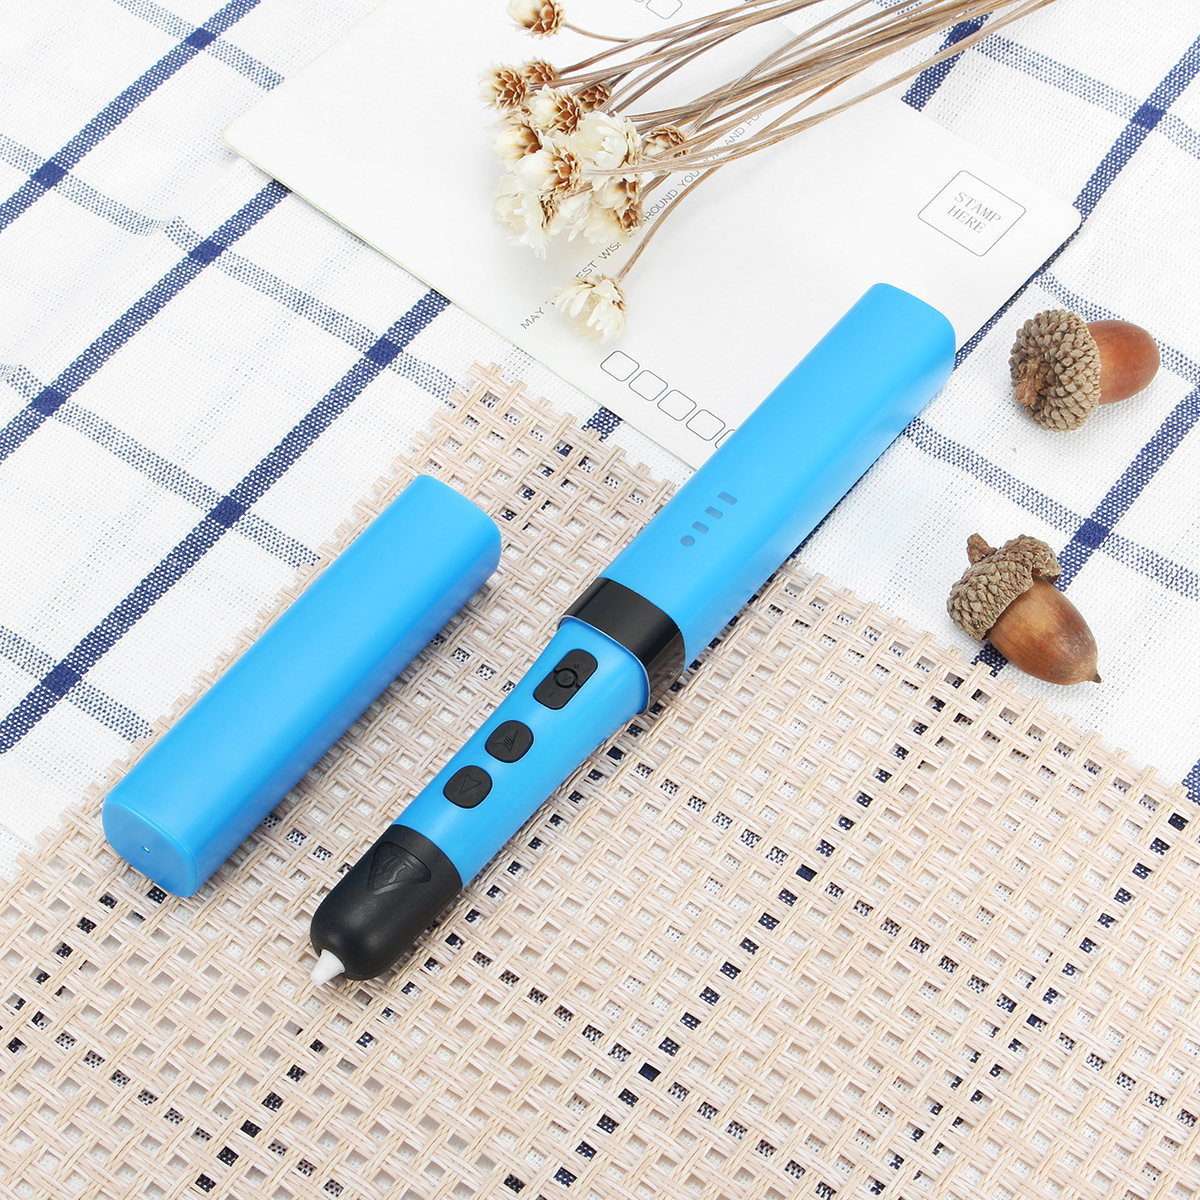 Red/White/Blue 5V/2A 1.75mm 0.7mm Nozzle Low Temperature 3D Printing Pen For Children 18